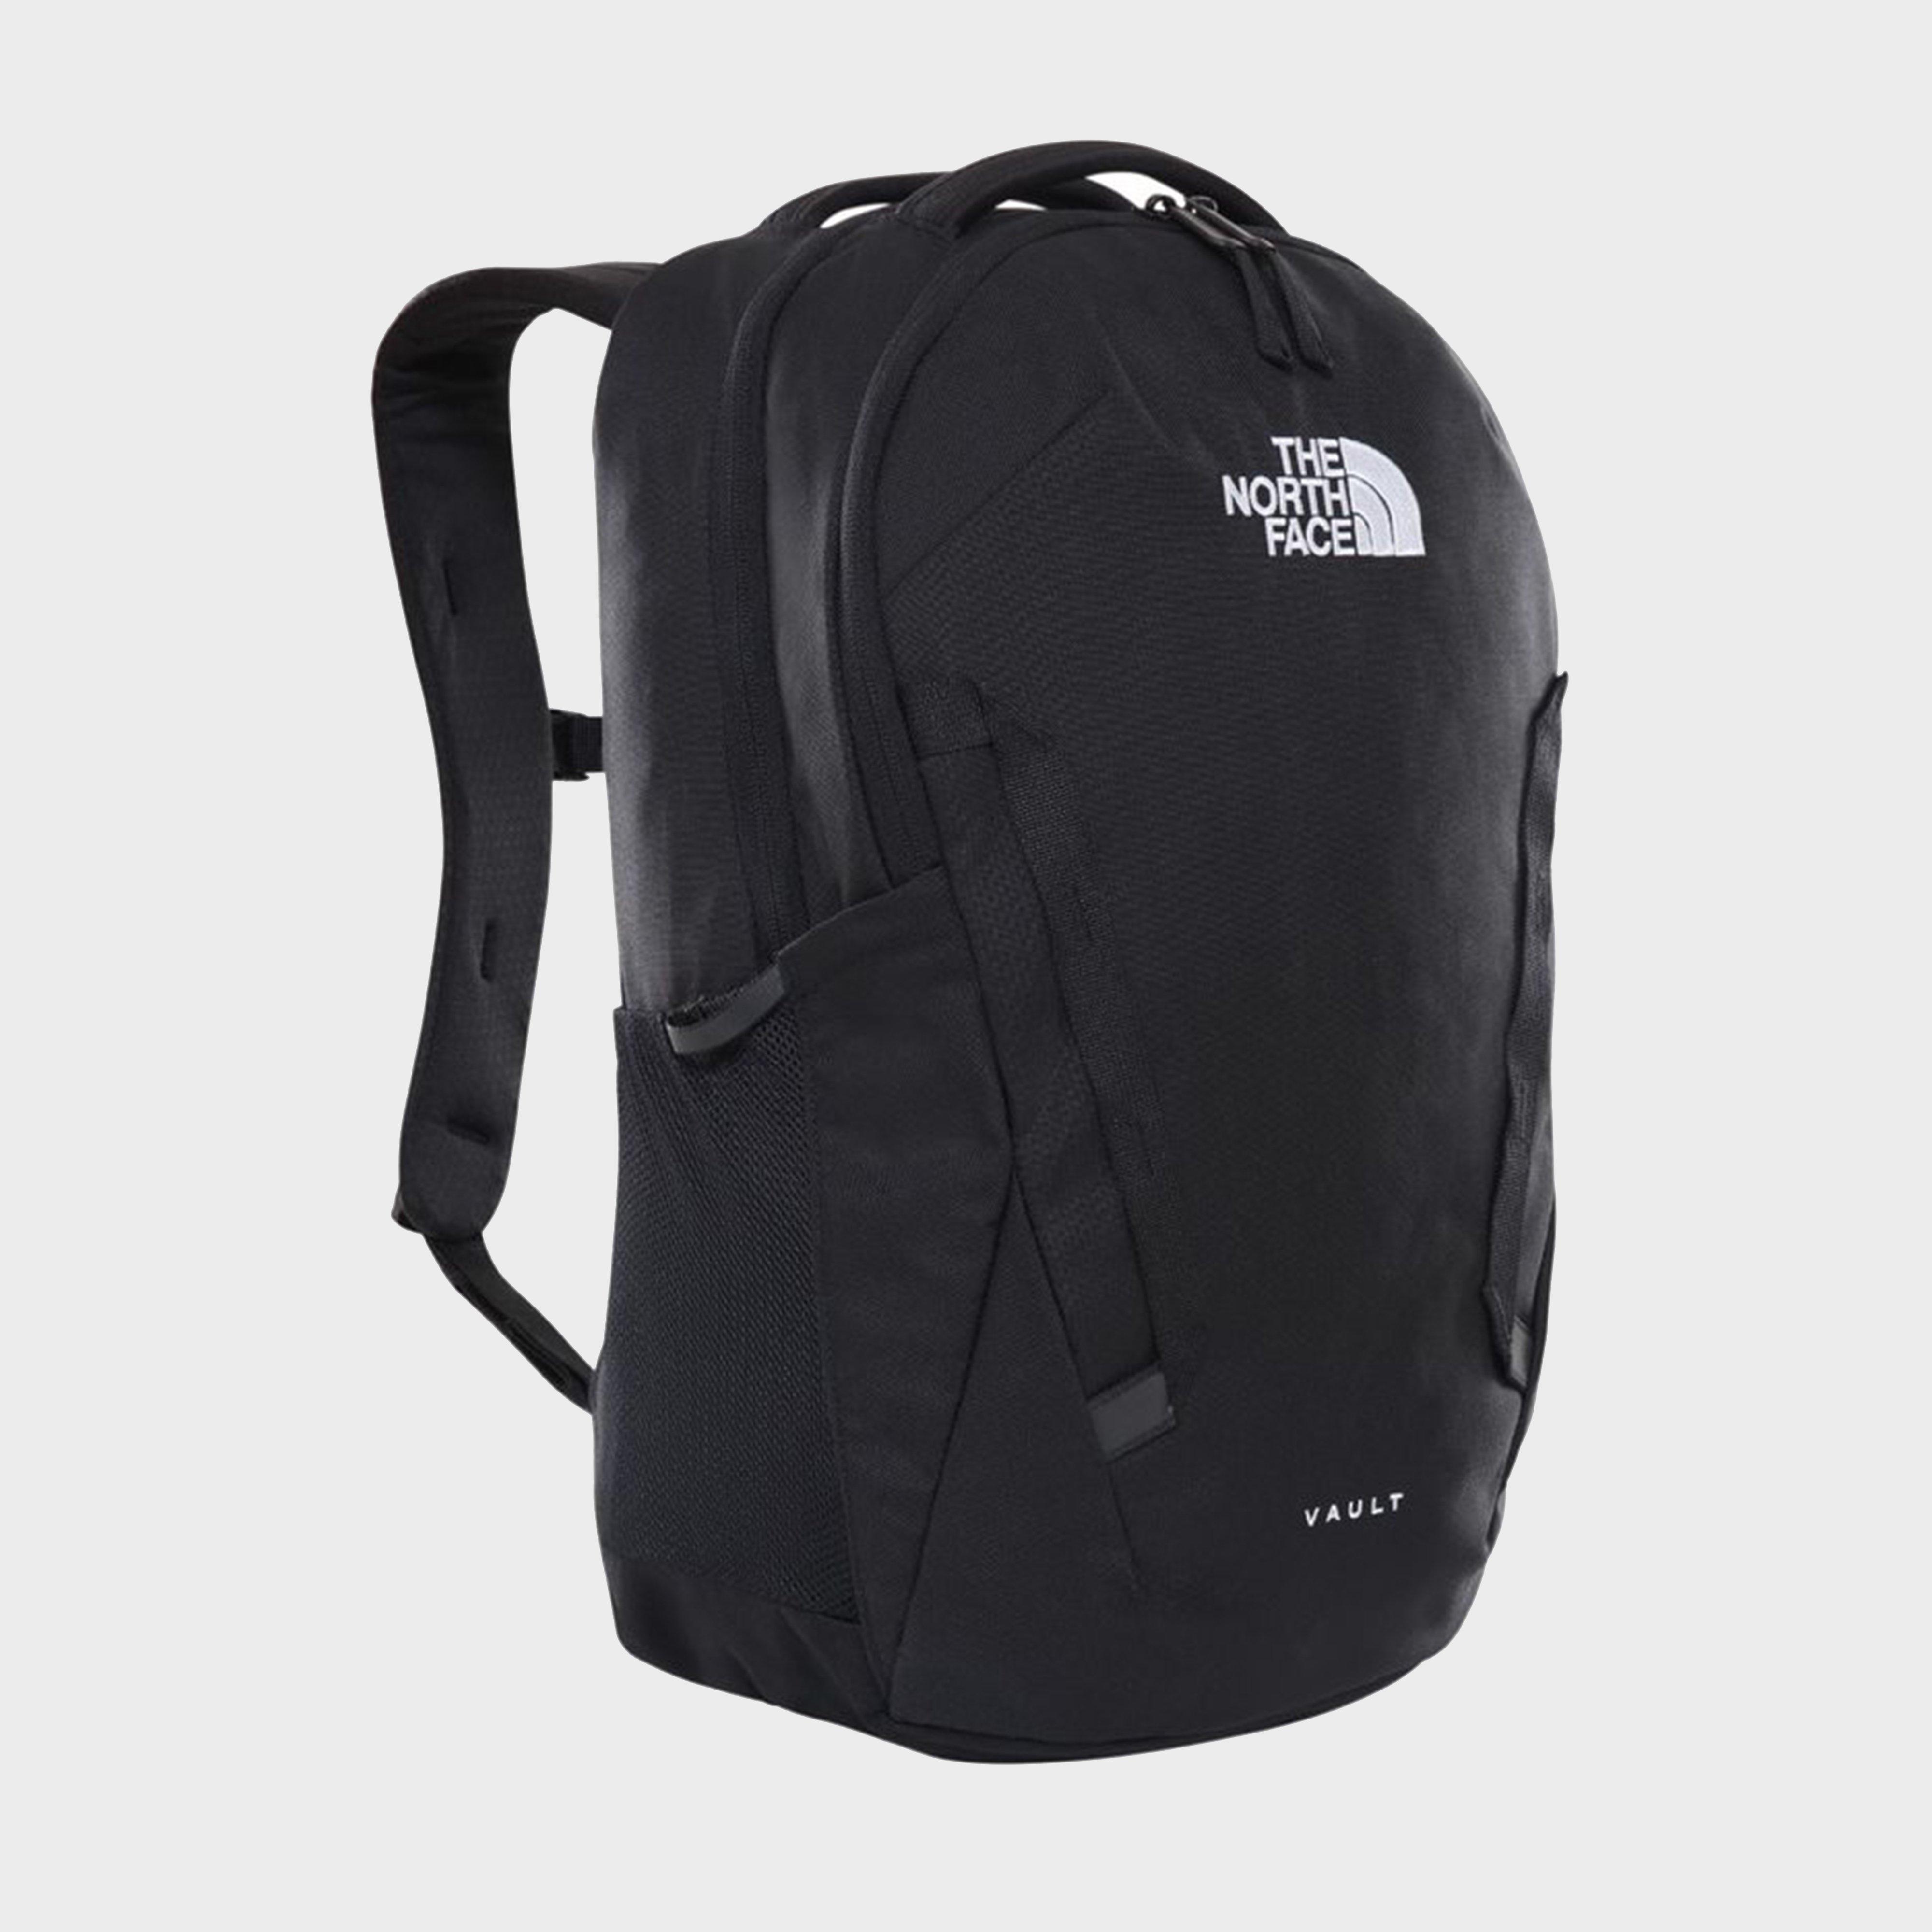 The North Face The North Face Vault 24L Backpack - Black, Black